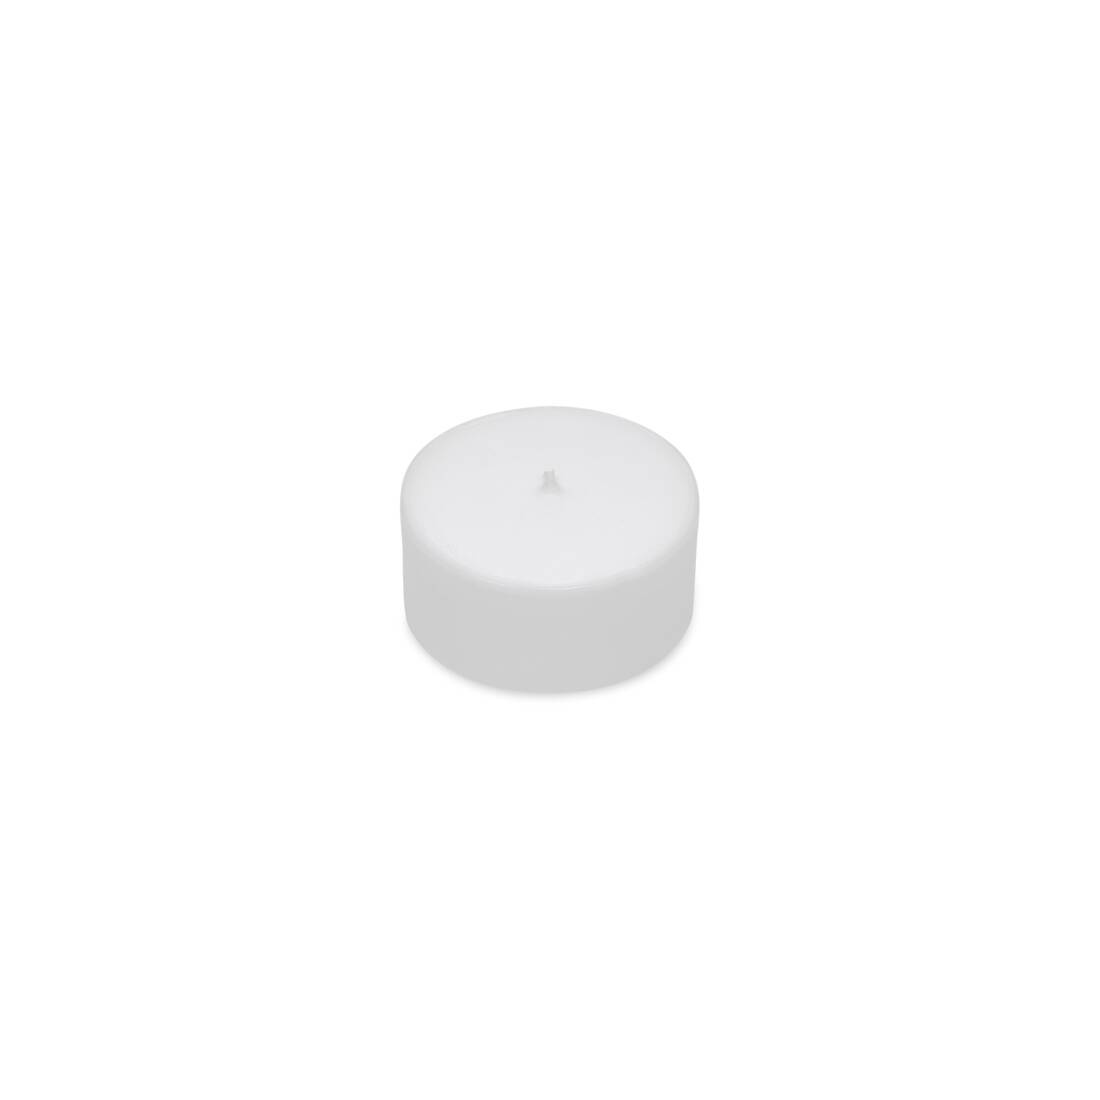 Travel Candle Refill in White - 1